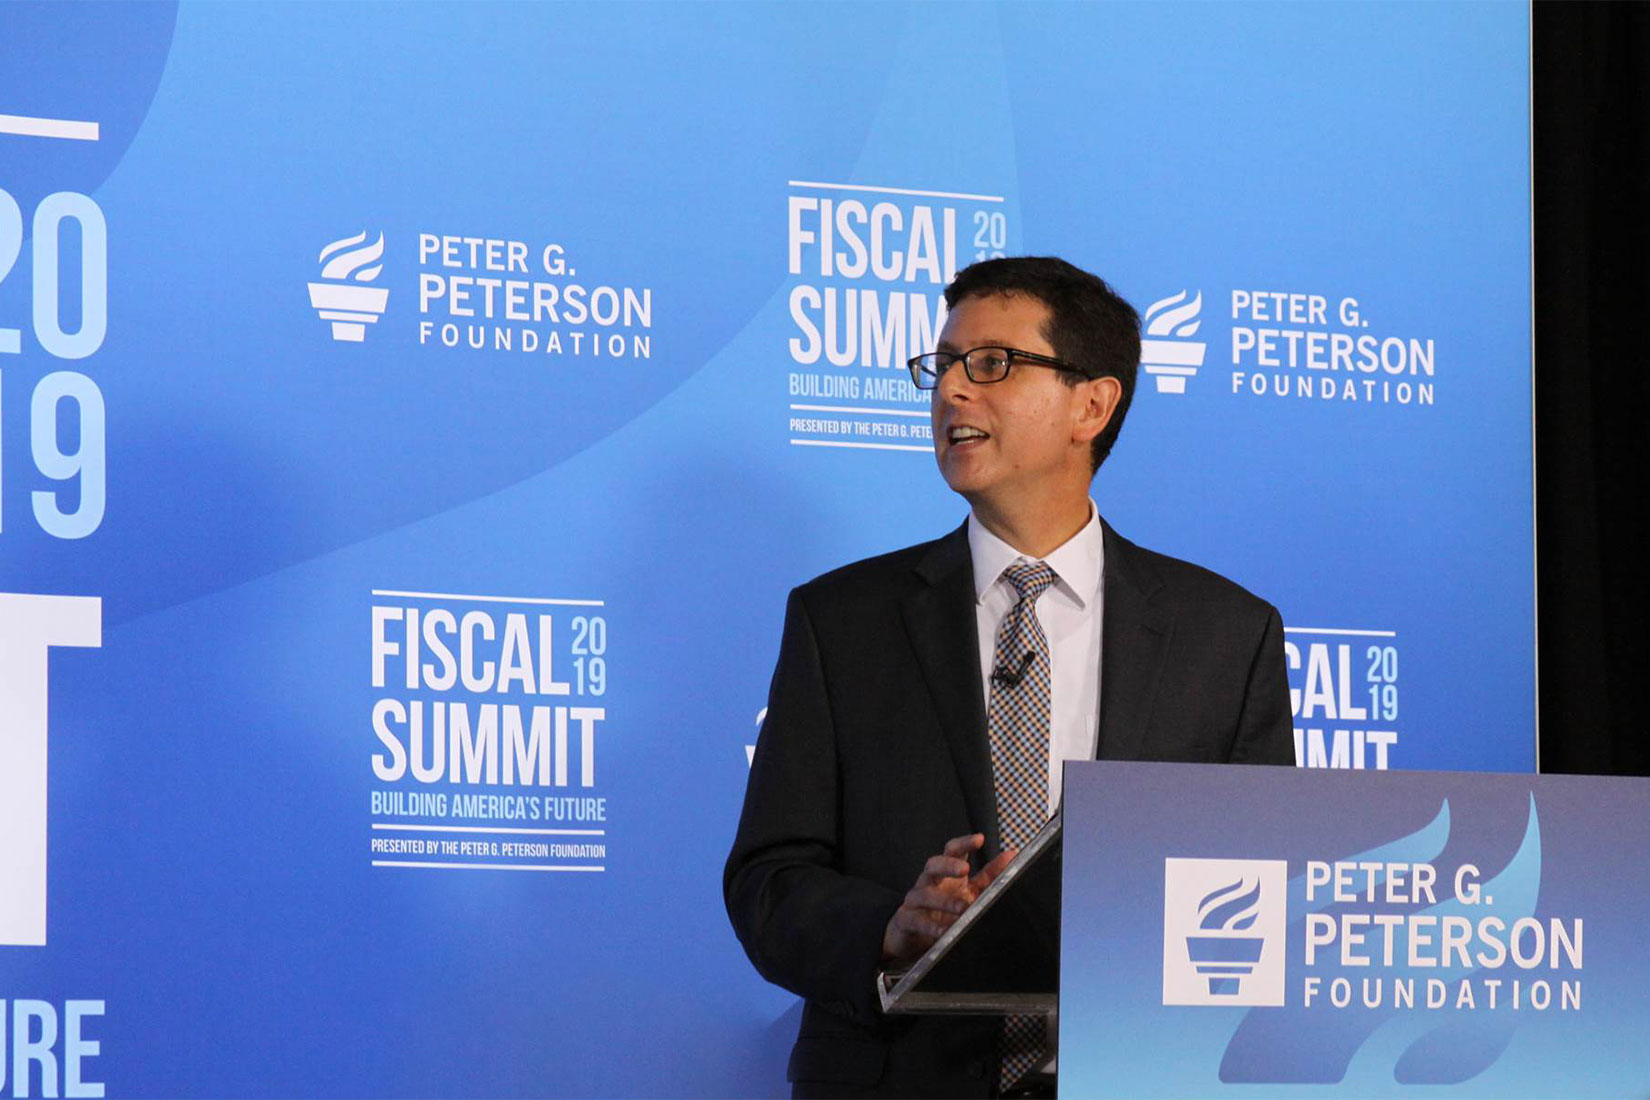 CBO Director Phillip L. Swagel at the Peterson Foundation’s 2019 Fiscal Summit in Washington, D.C.